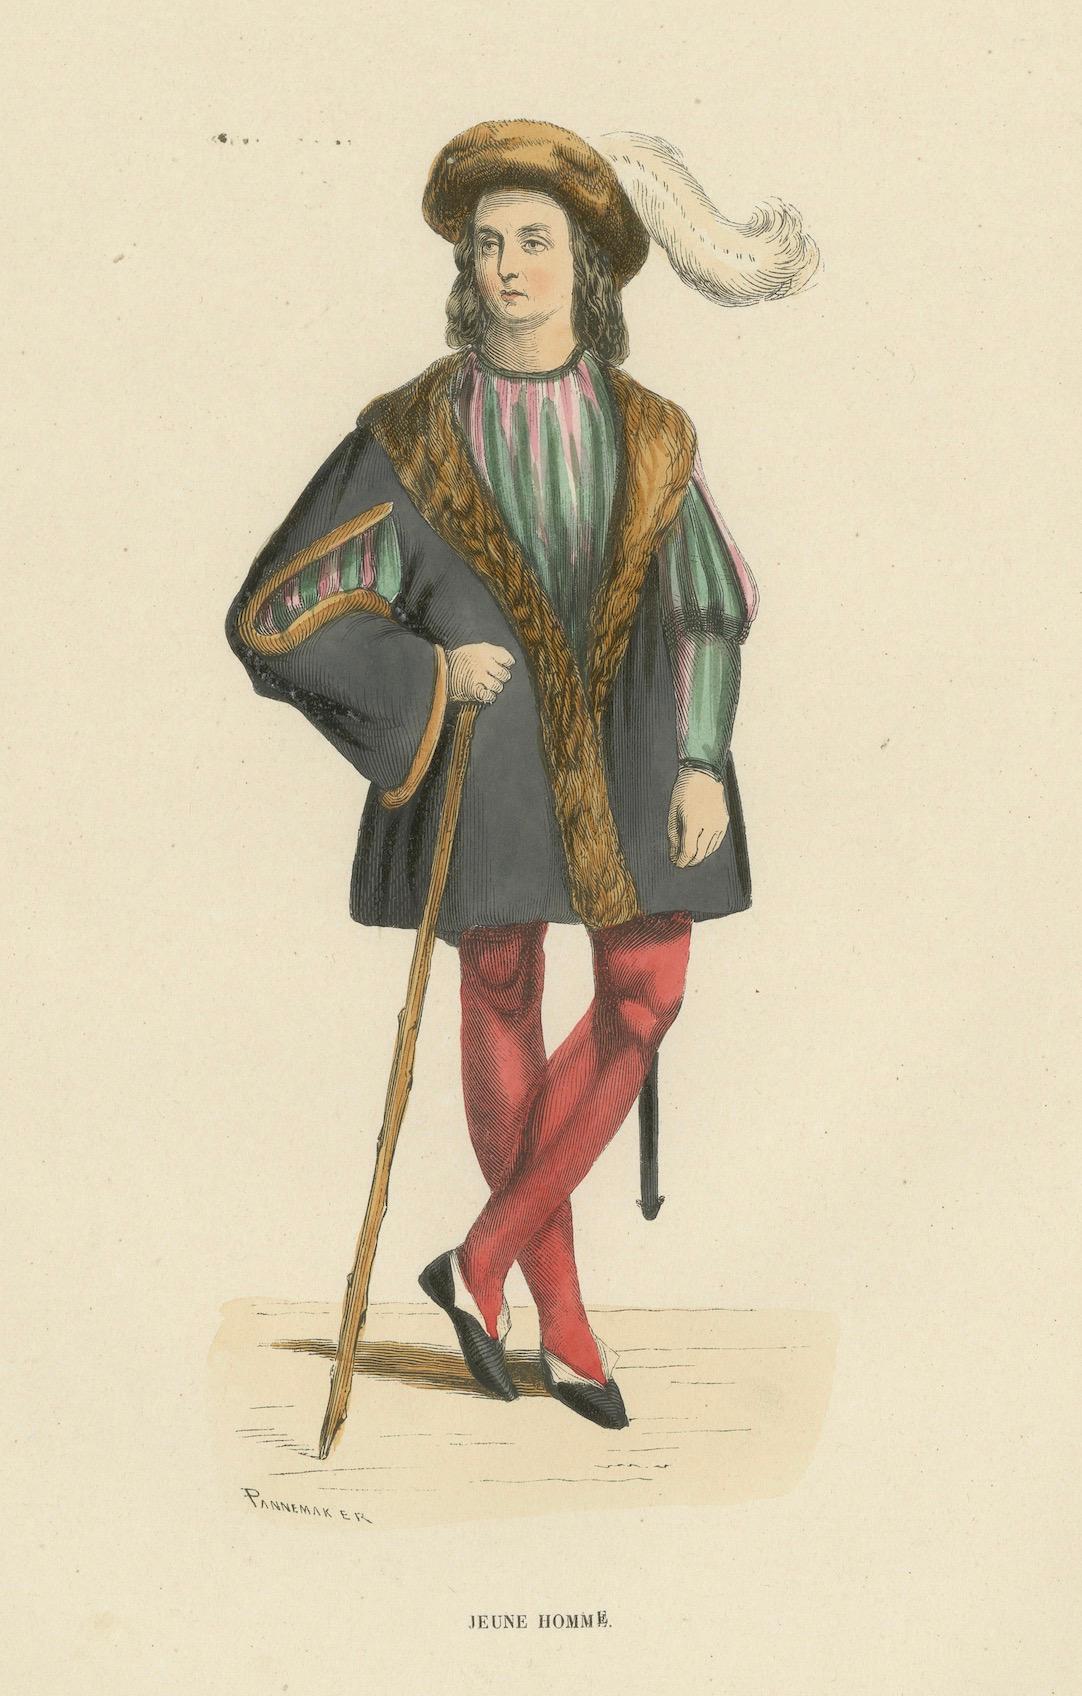 Paper Youthful Elegance: A Young Gentleman's Attire in 'Costume du Moyen Âge', 1847 For Sale